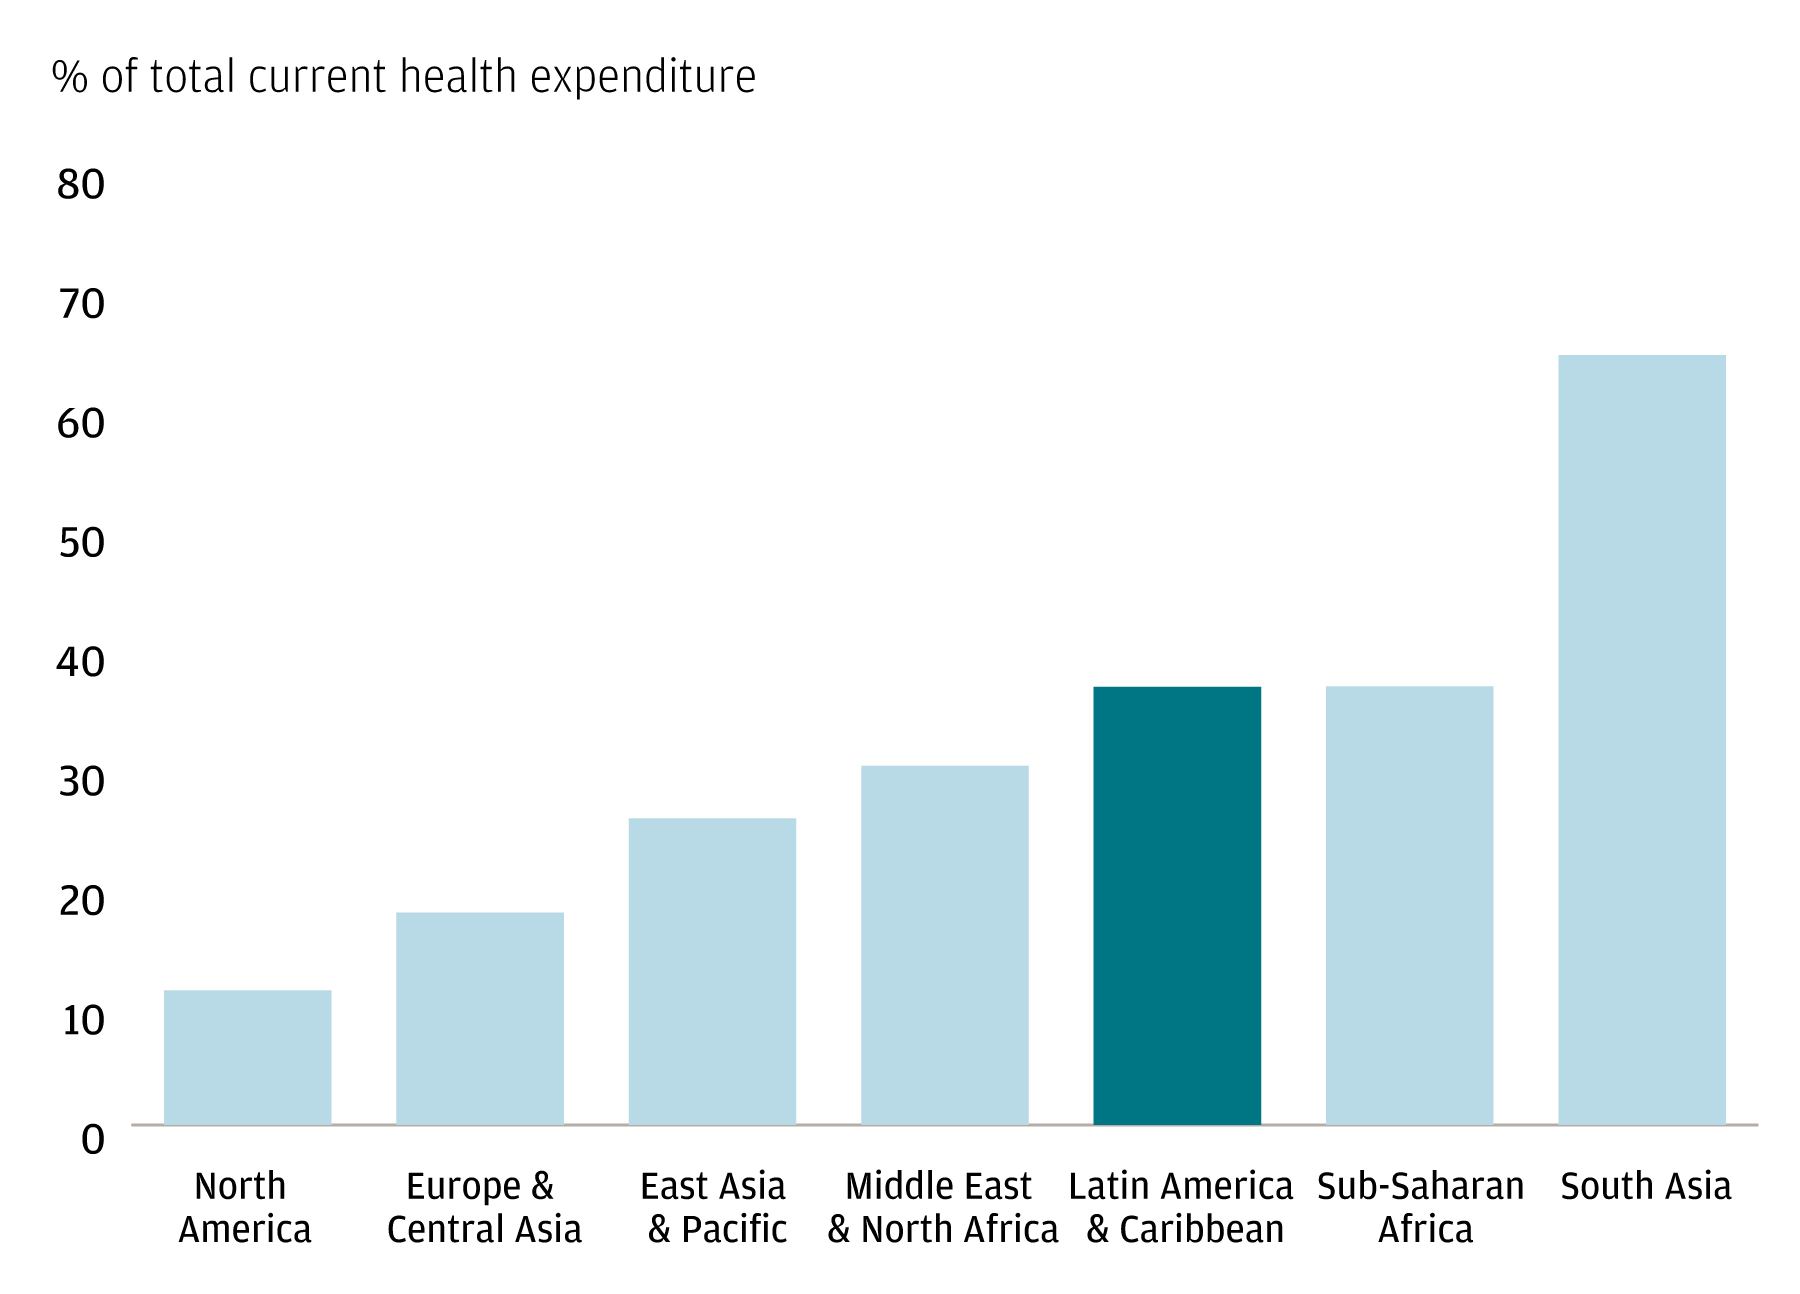 A bar graph showing the percentage of out-of-pocket health expenditures for North America, Europe and Central Asia, East Asia and the Pacific, the Middle East and North Africa, Latin America and the Caribbean, Sub-Saharan Africa and South Asia. 